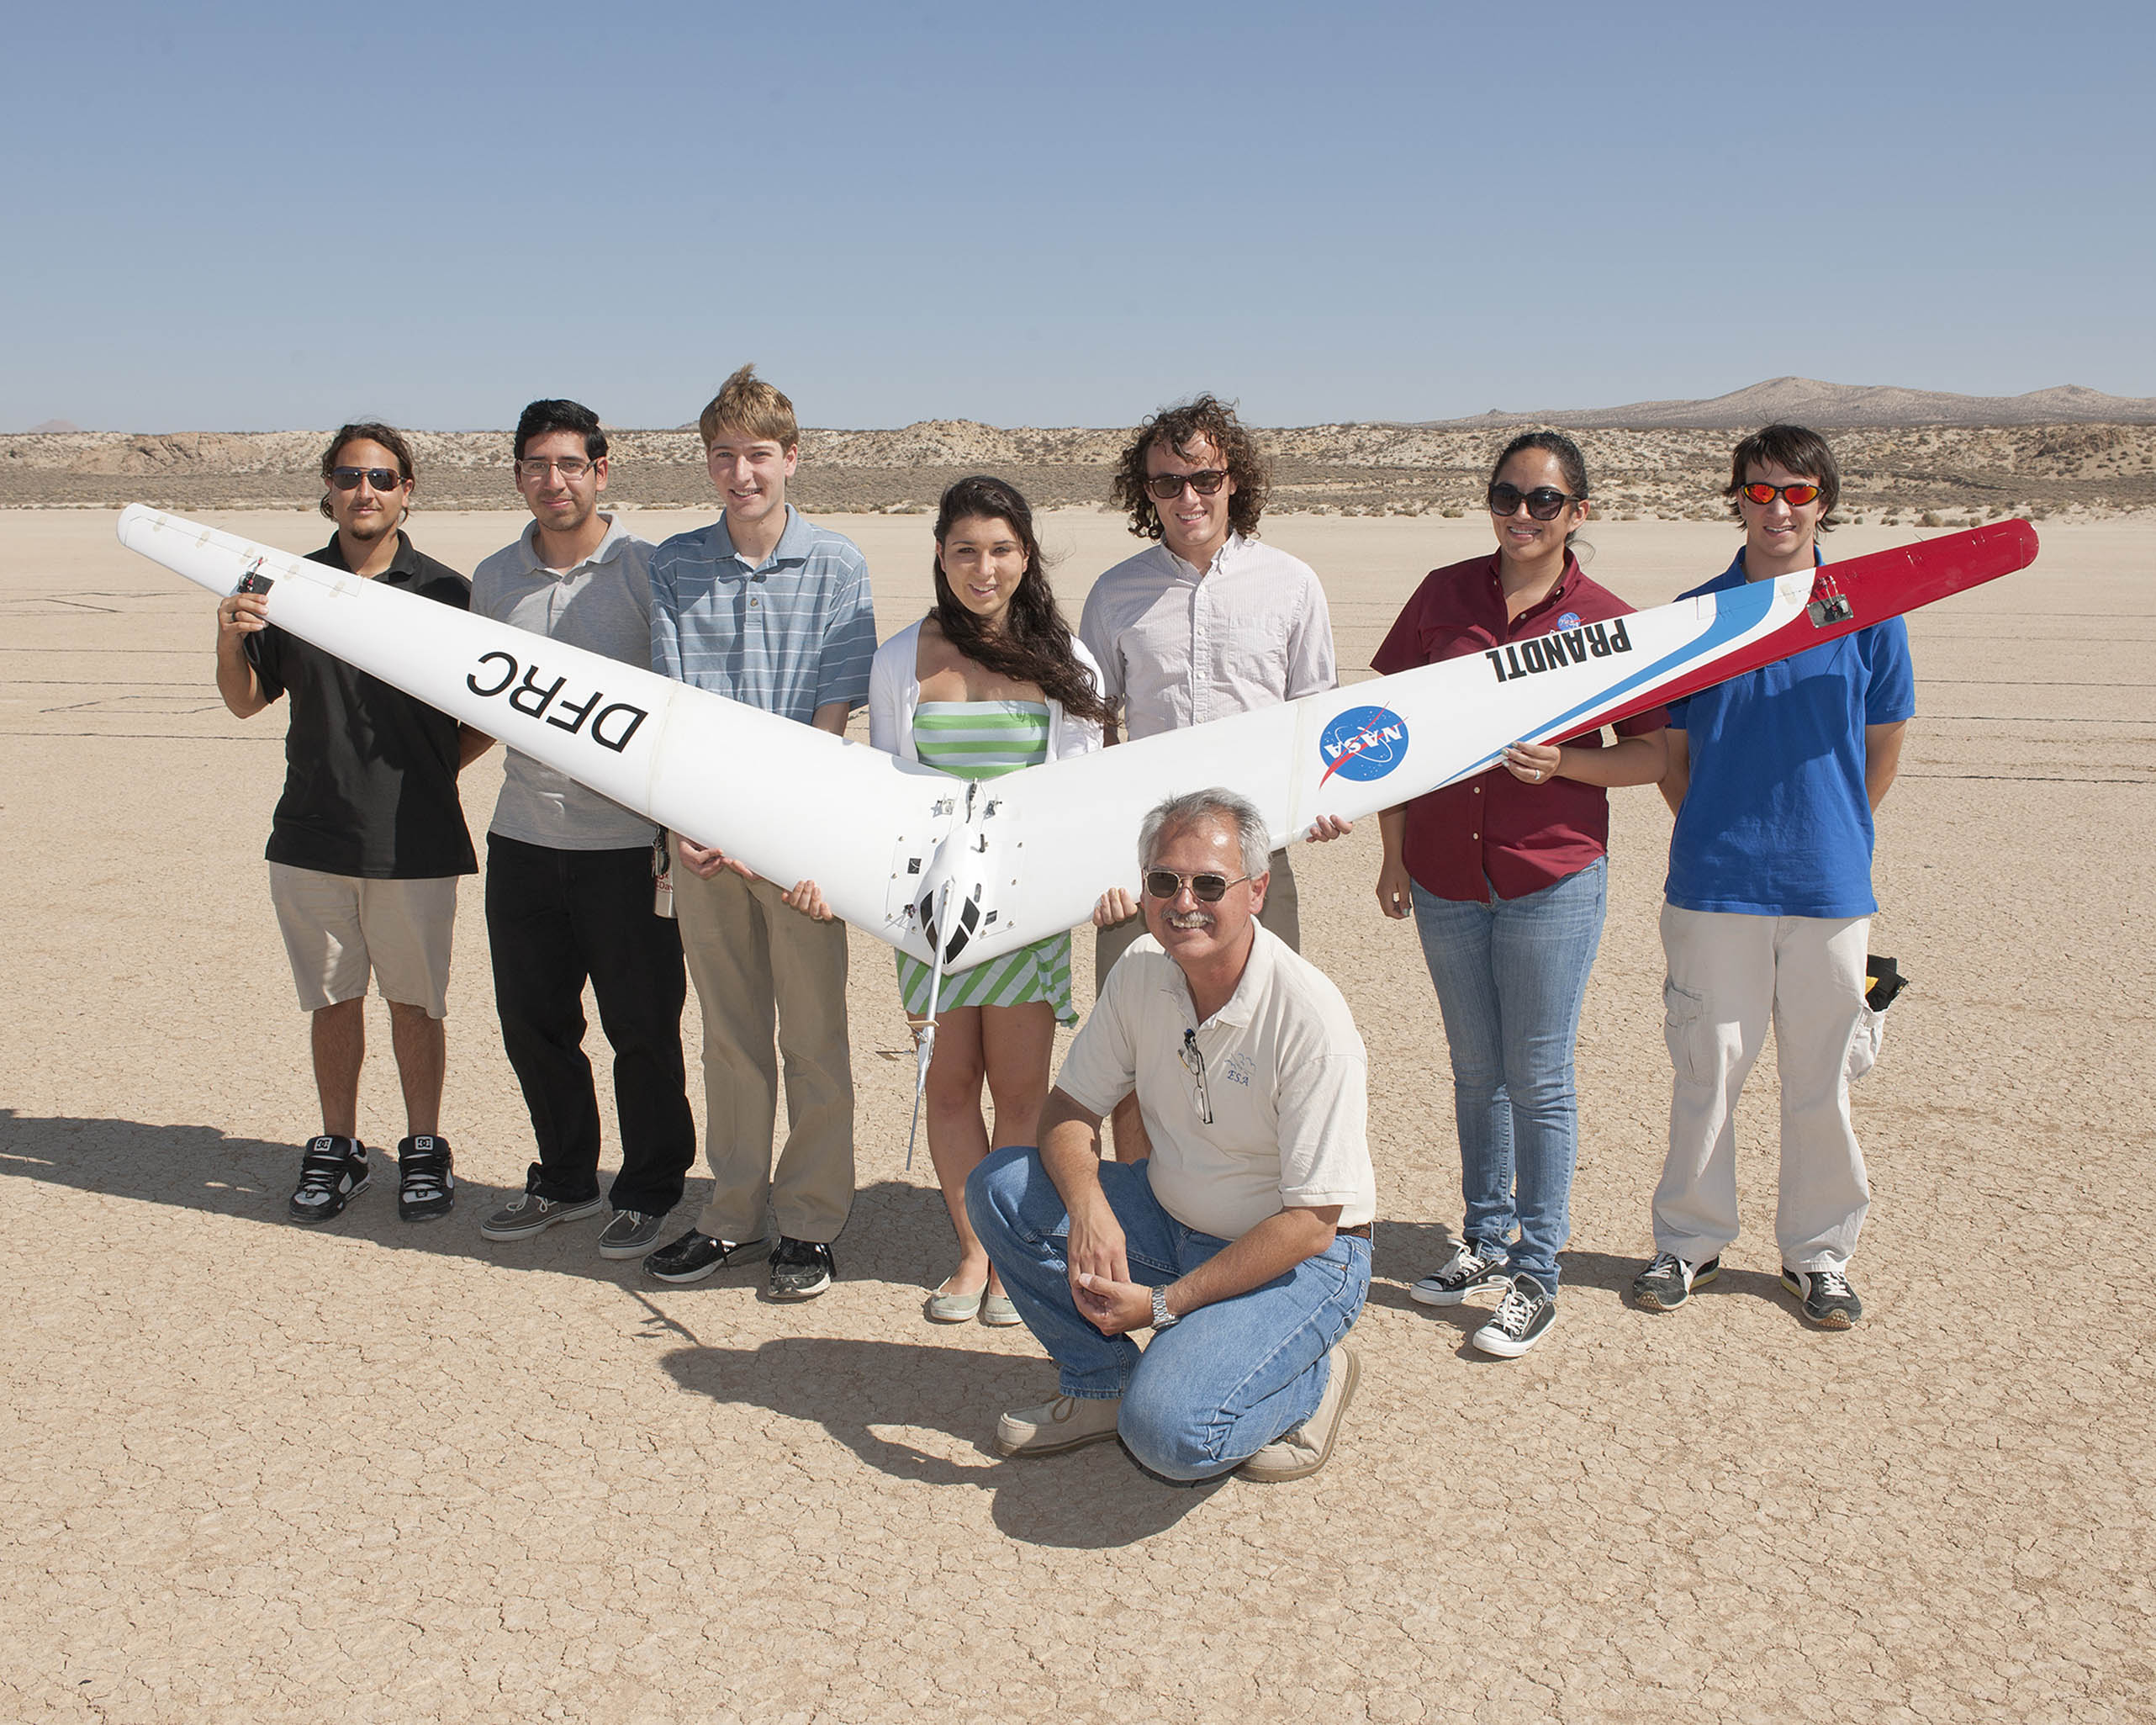 NASA Dryden's Al Bowers and some of the students he mentored in the 2013 NASA Aeronautics Academy display the second subscale Prandtl-D flying wing following its first test flight last August. (NASA / Tom Tschida)